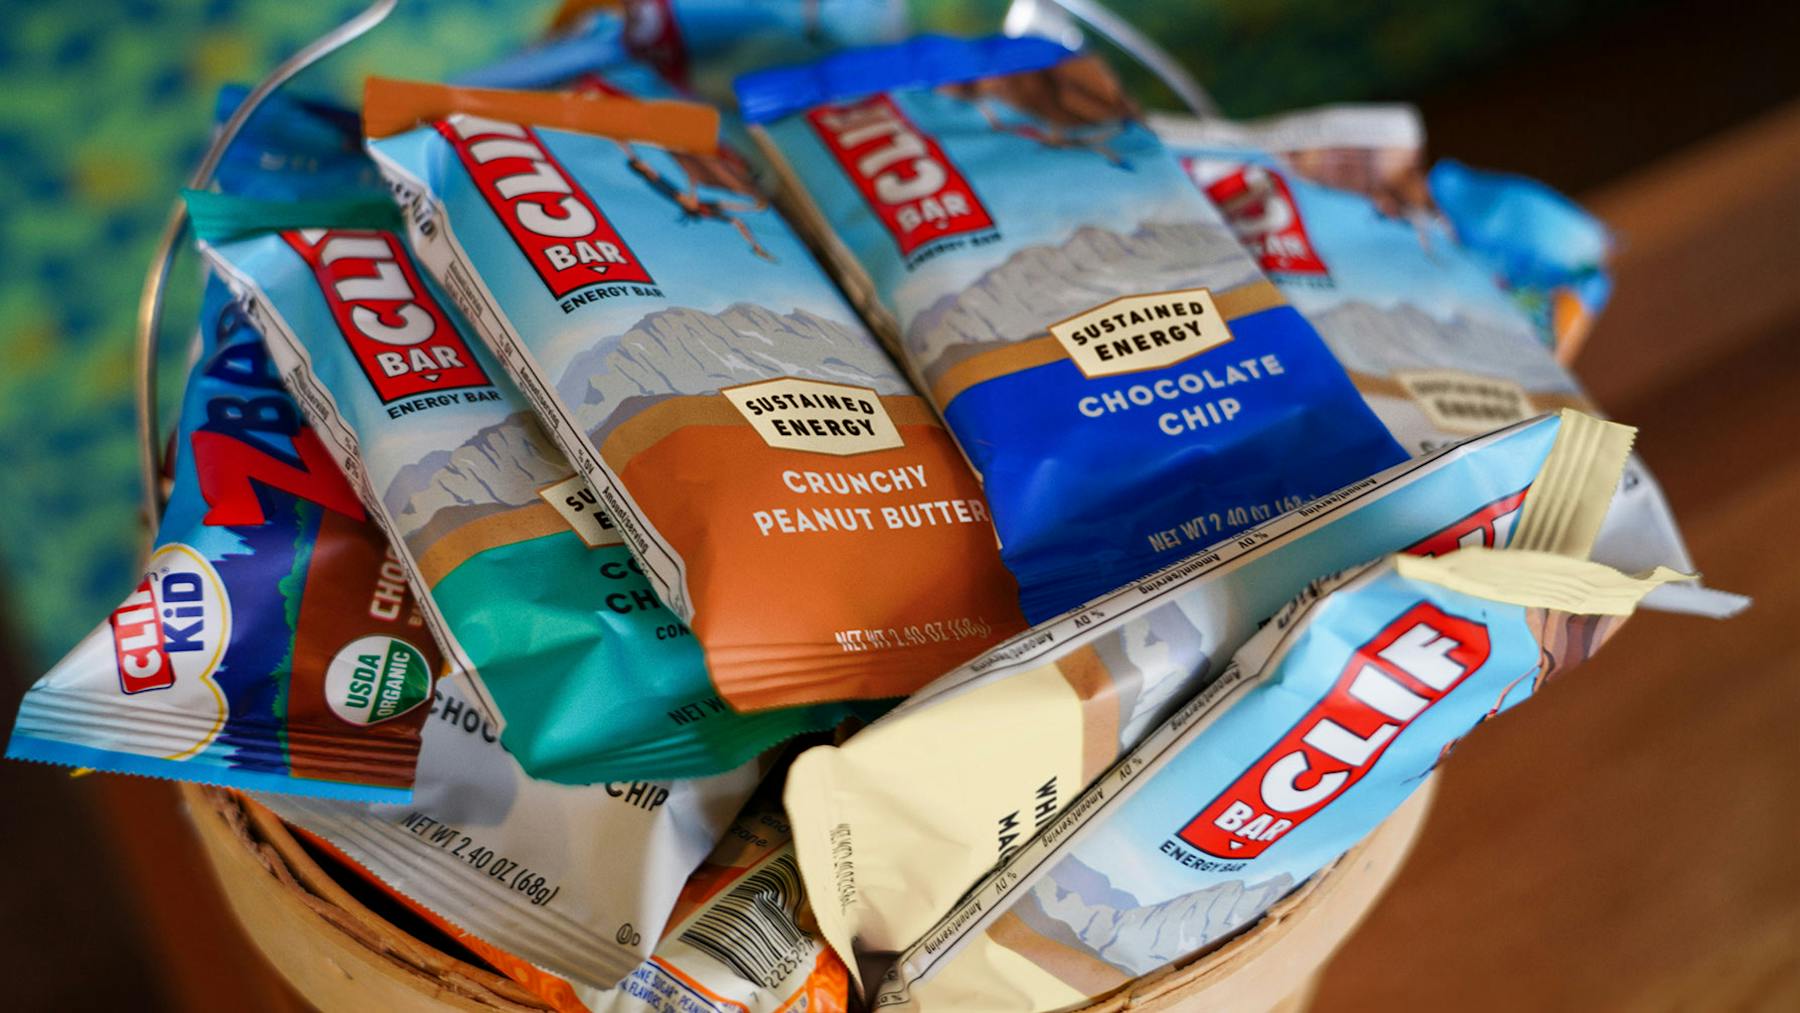 A basket full of CLIF BAR and Zbar flavors